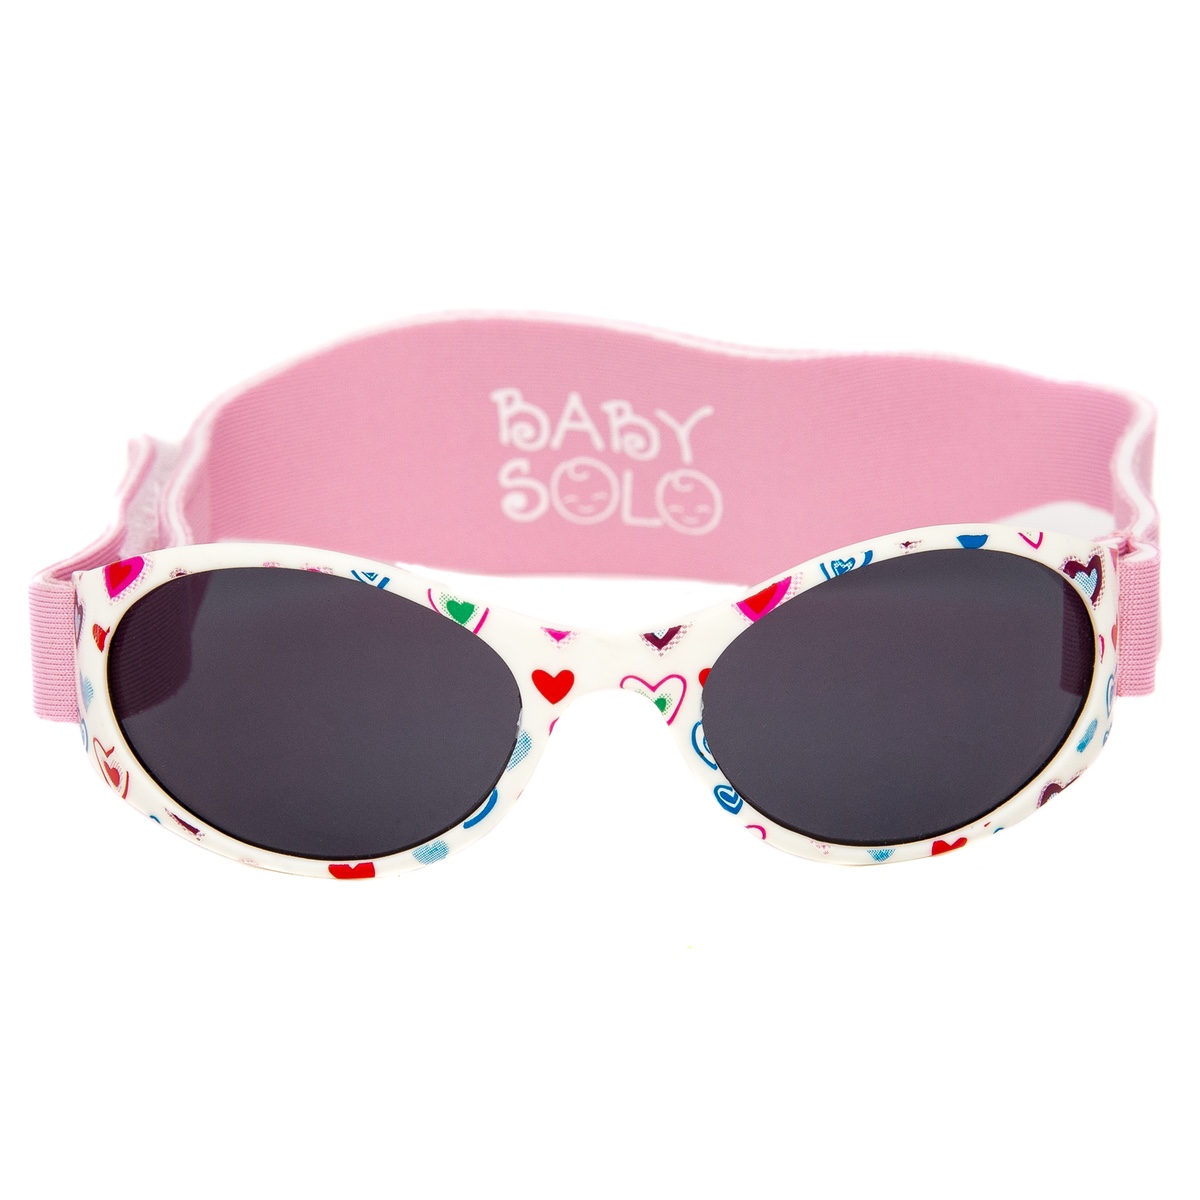 Soft Adorable Durable Case Included 0-36 Months, Dino Dance Frame w/Solid Black Lens Baby Solo Original Baby Sunglasses Safe 